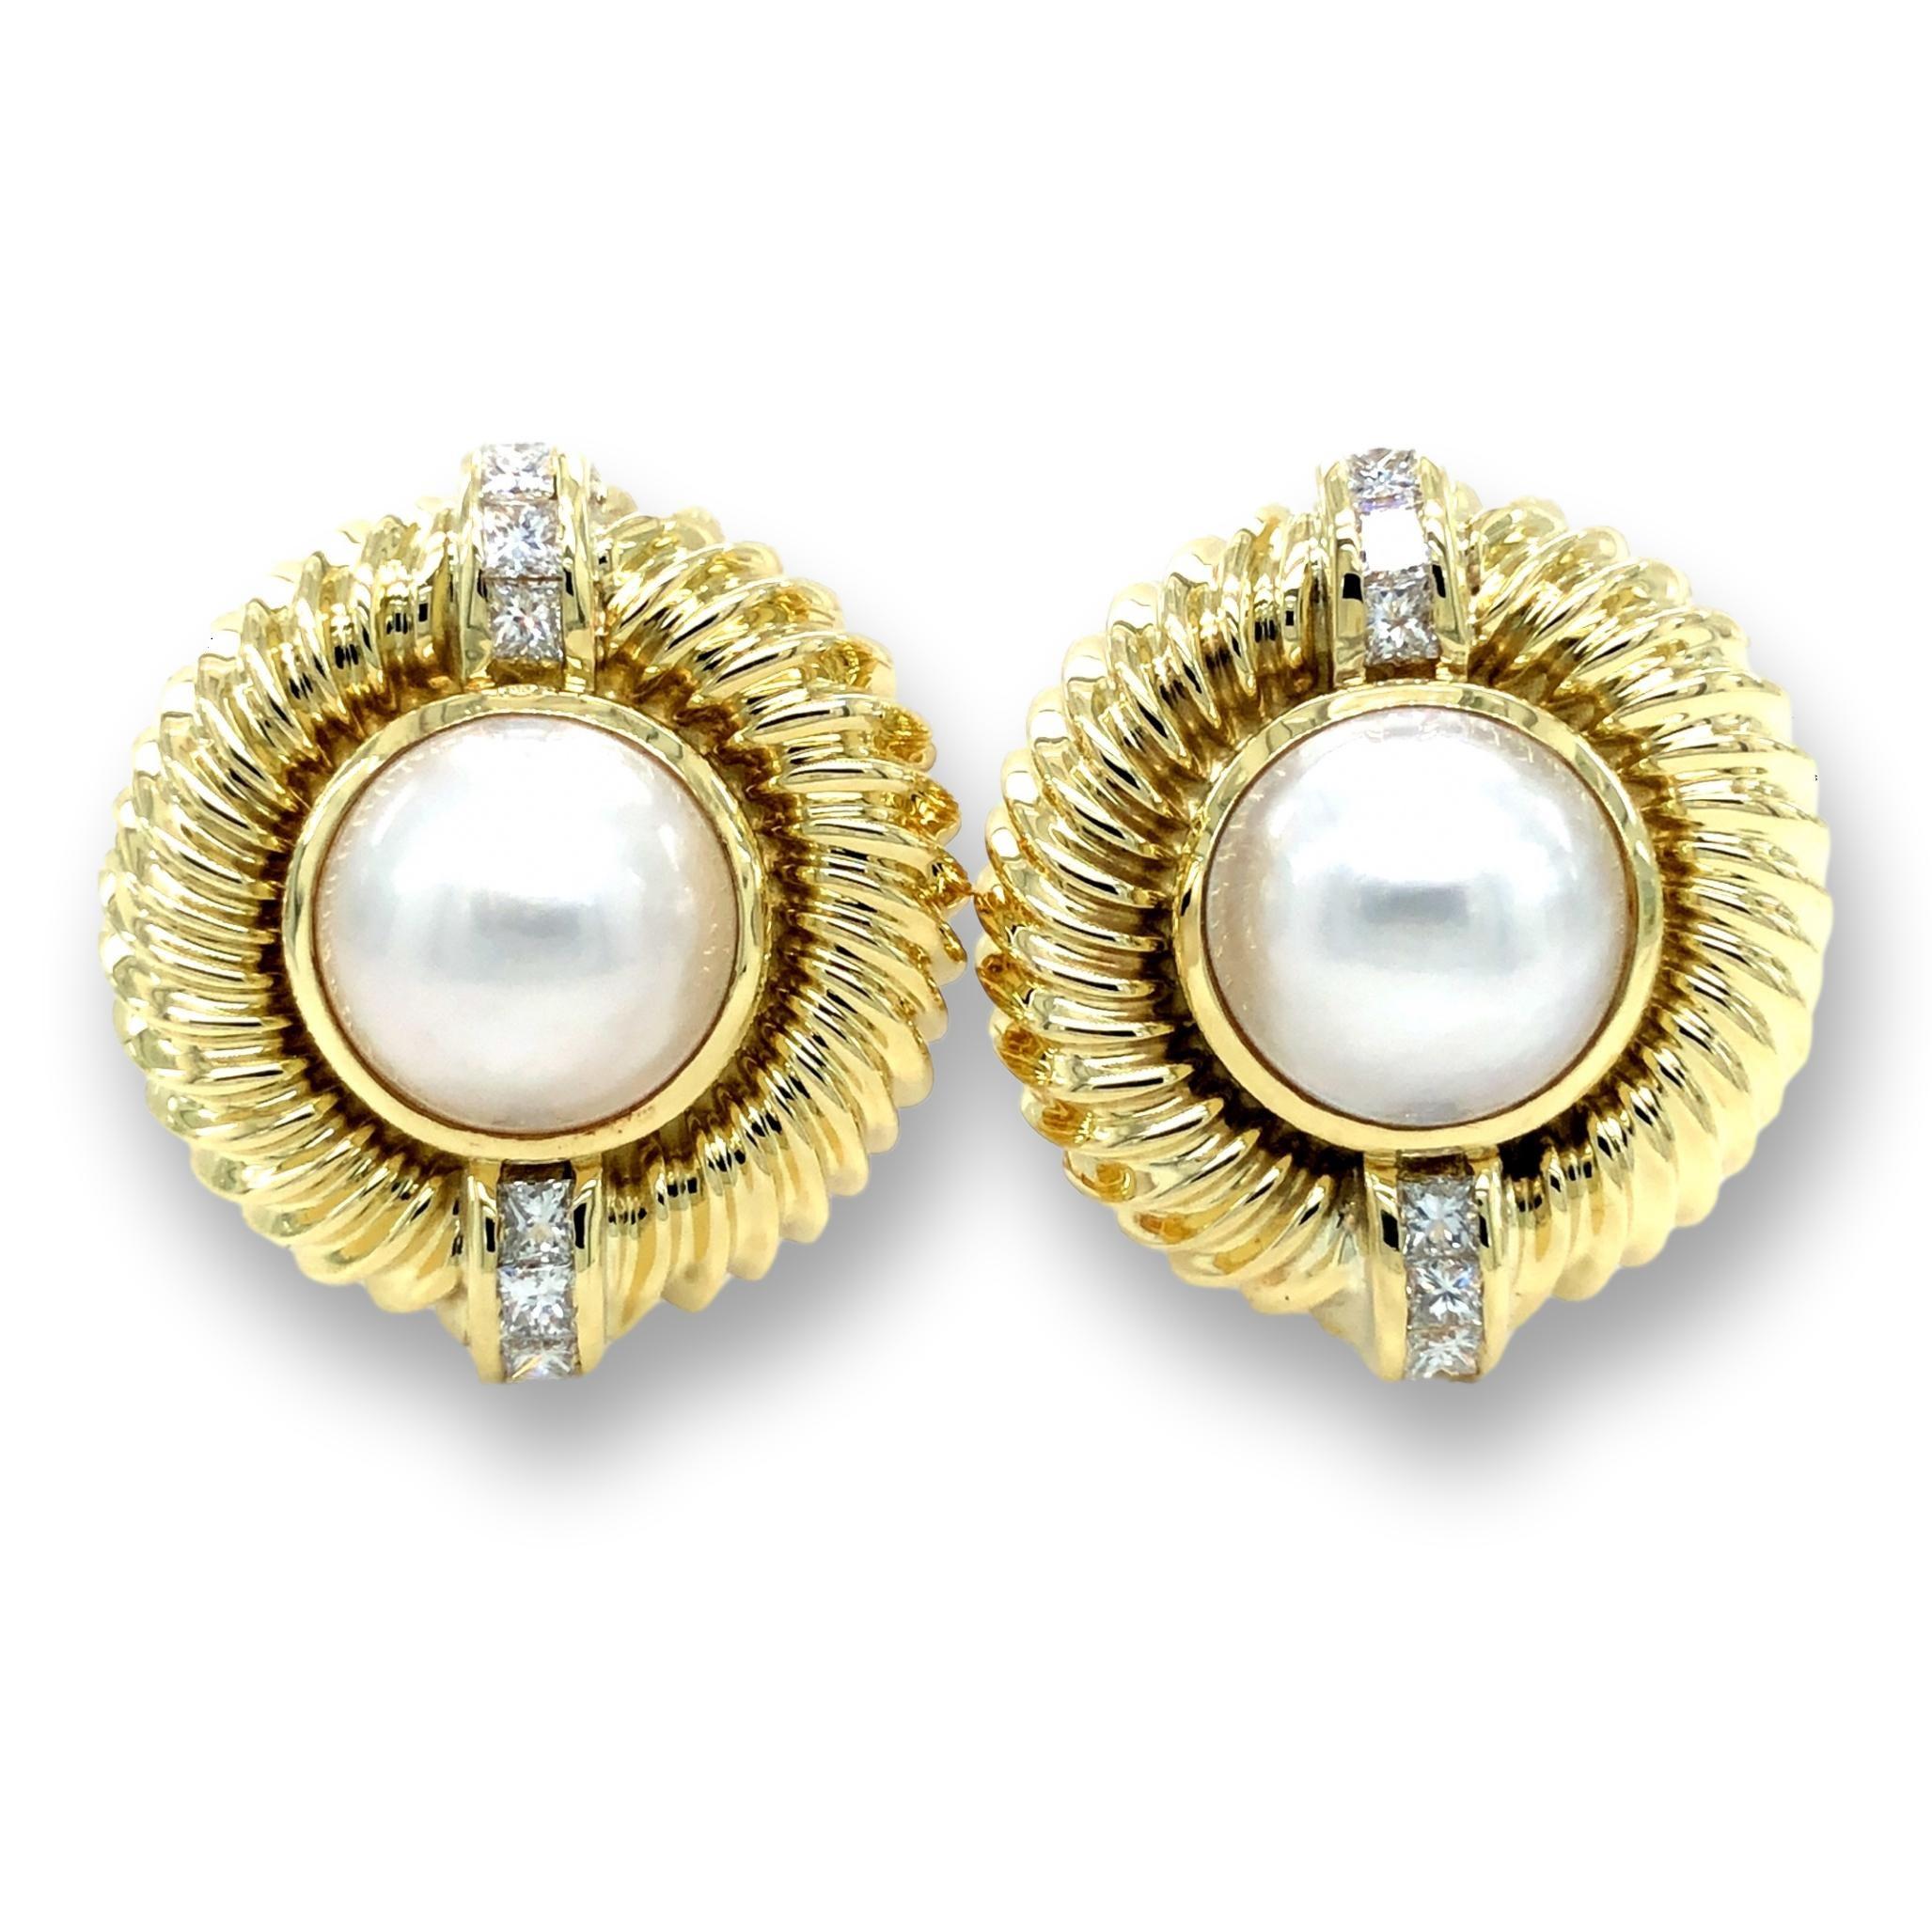 David Yurman vintage earrings finely crafted in 14 karat yellow gold featuring two 10 mm mabe pearl centers set in bezels and 6 princess cut diamond accents on each earring weighing 0.65 cts total weight approximately.  Earrings have a twist cable